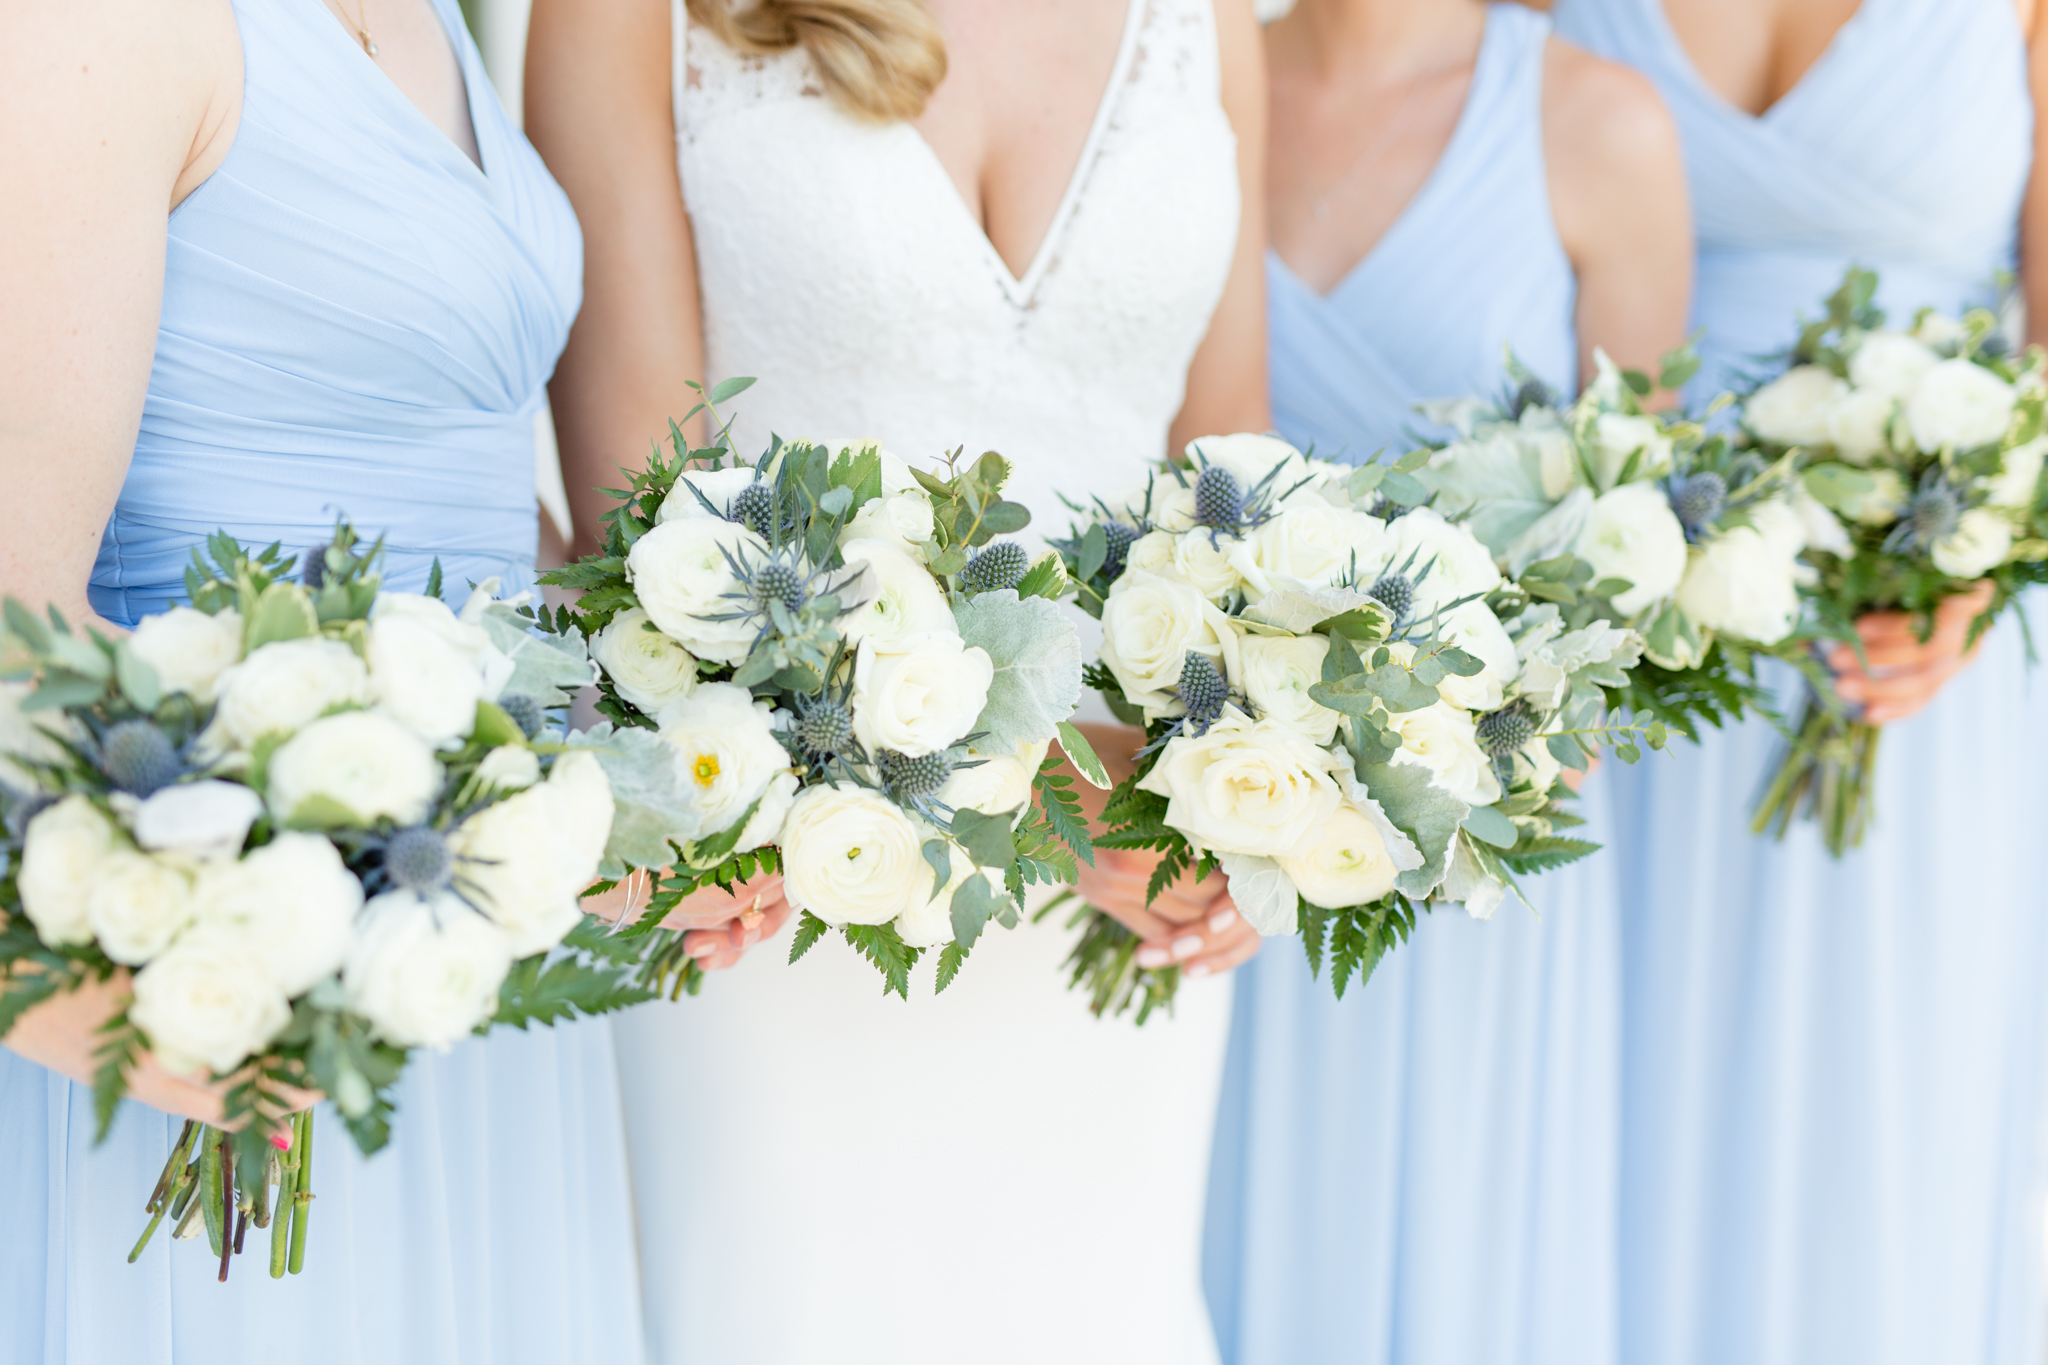 Bride and bridesmaids hold flowers.